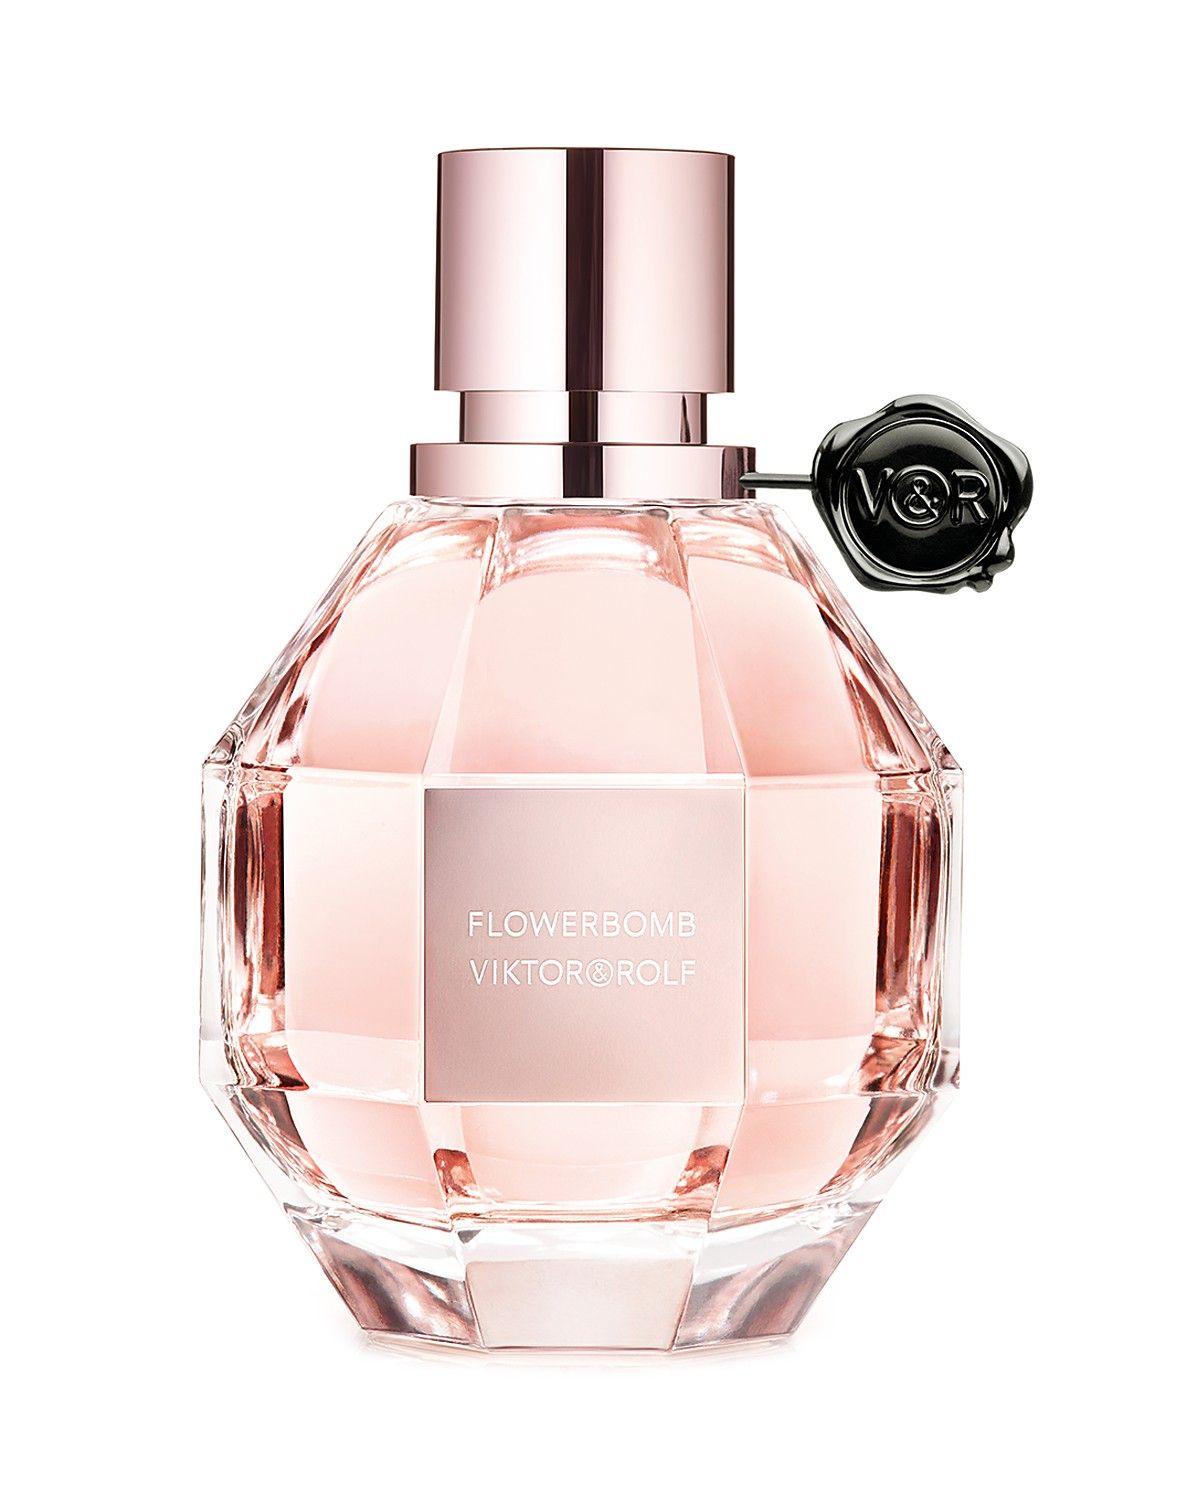 Celebrating Flowerbomb Five Minutes With Viktor And Rolf Harpers